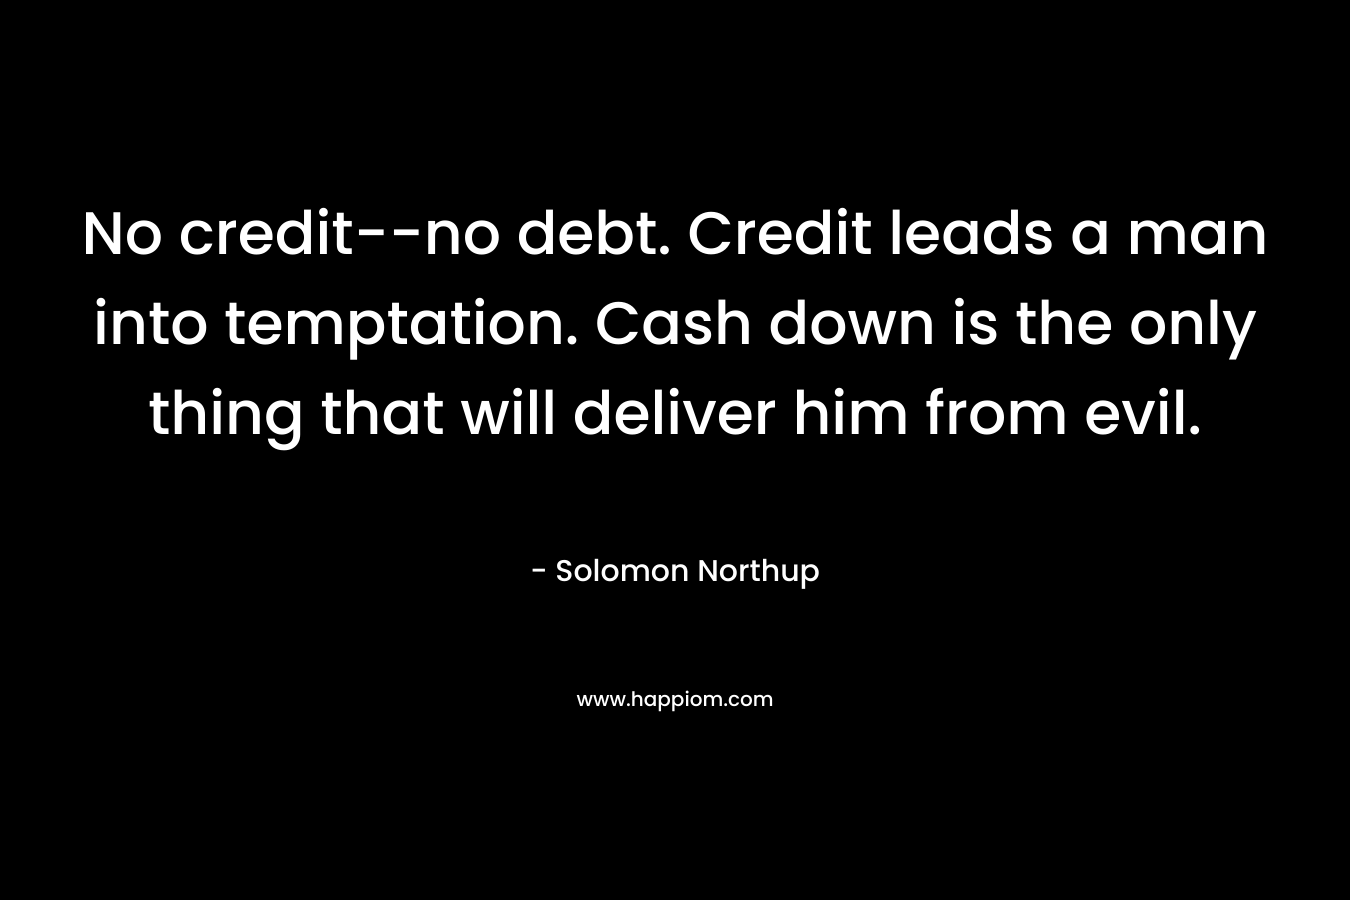 No credit–no debt. Credit leads a man into temptation. Cash down is the only thing that will deliver him from evil. – Solomon Northup